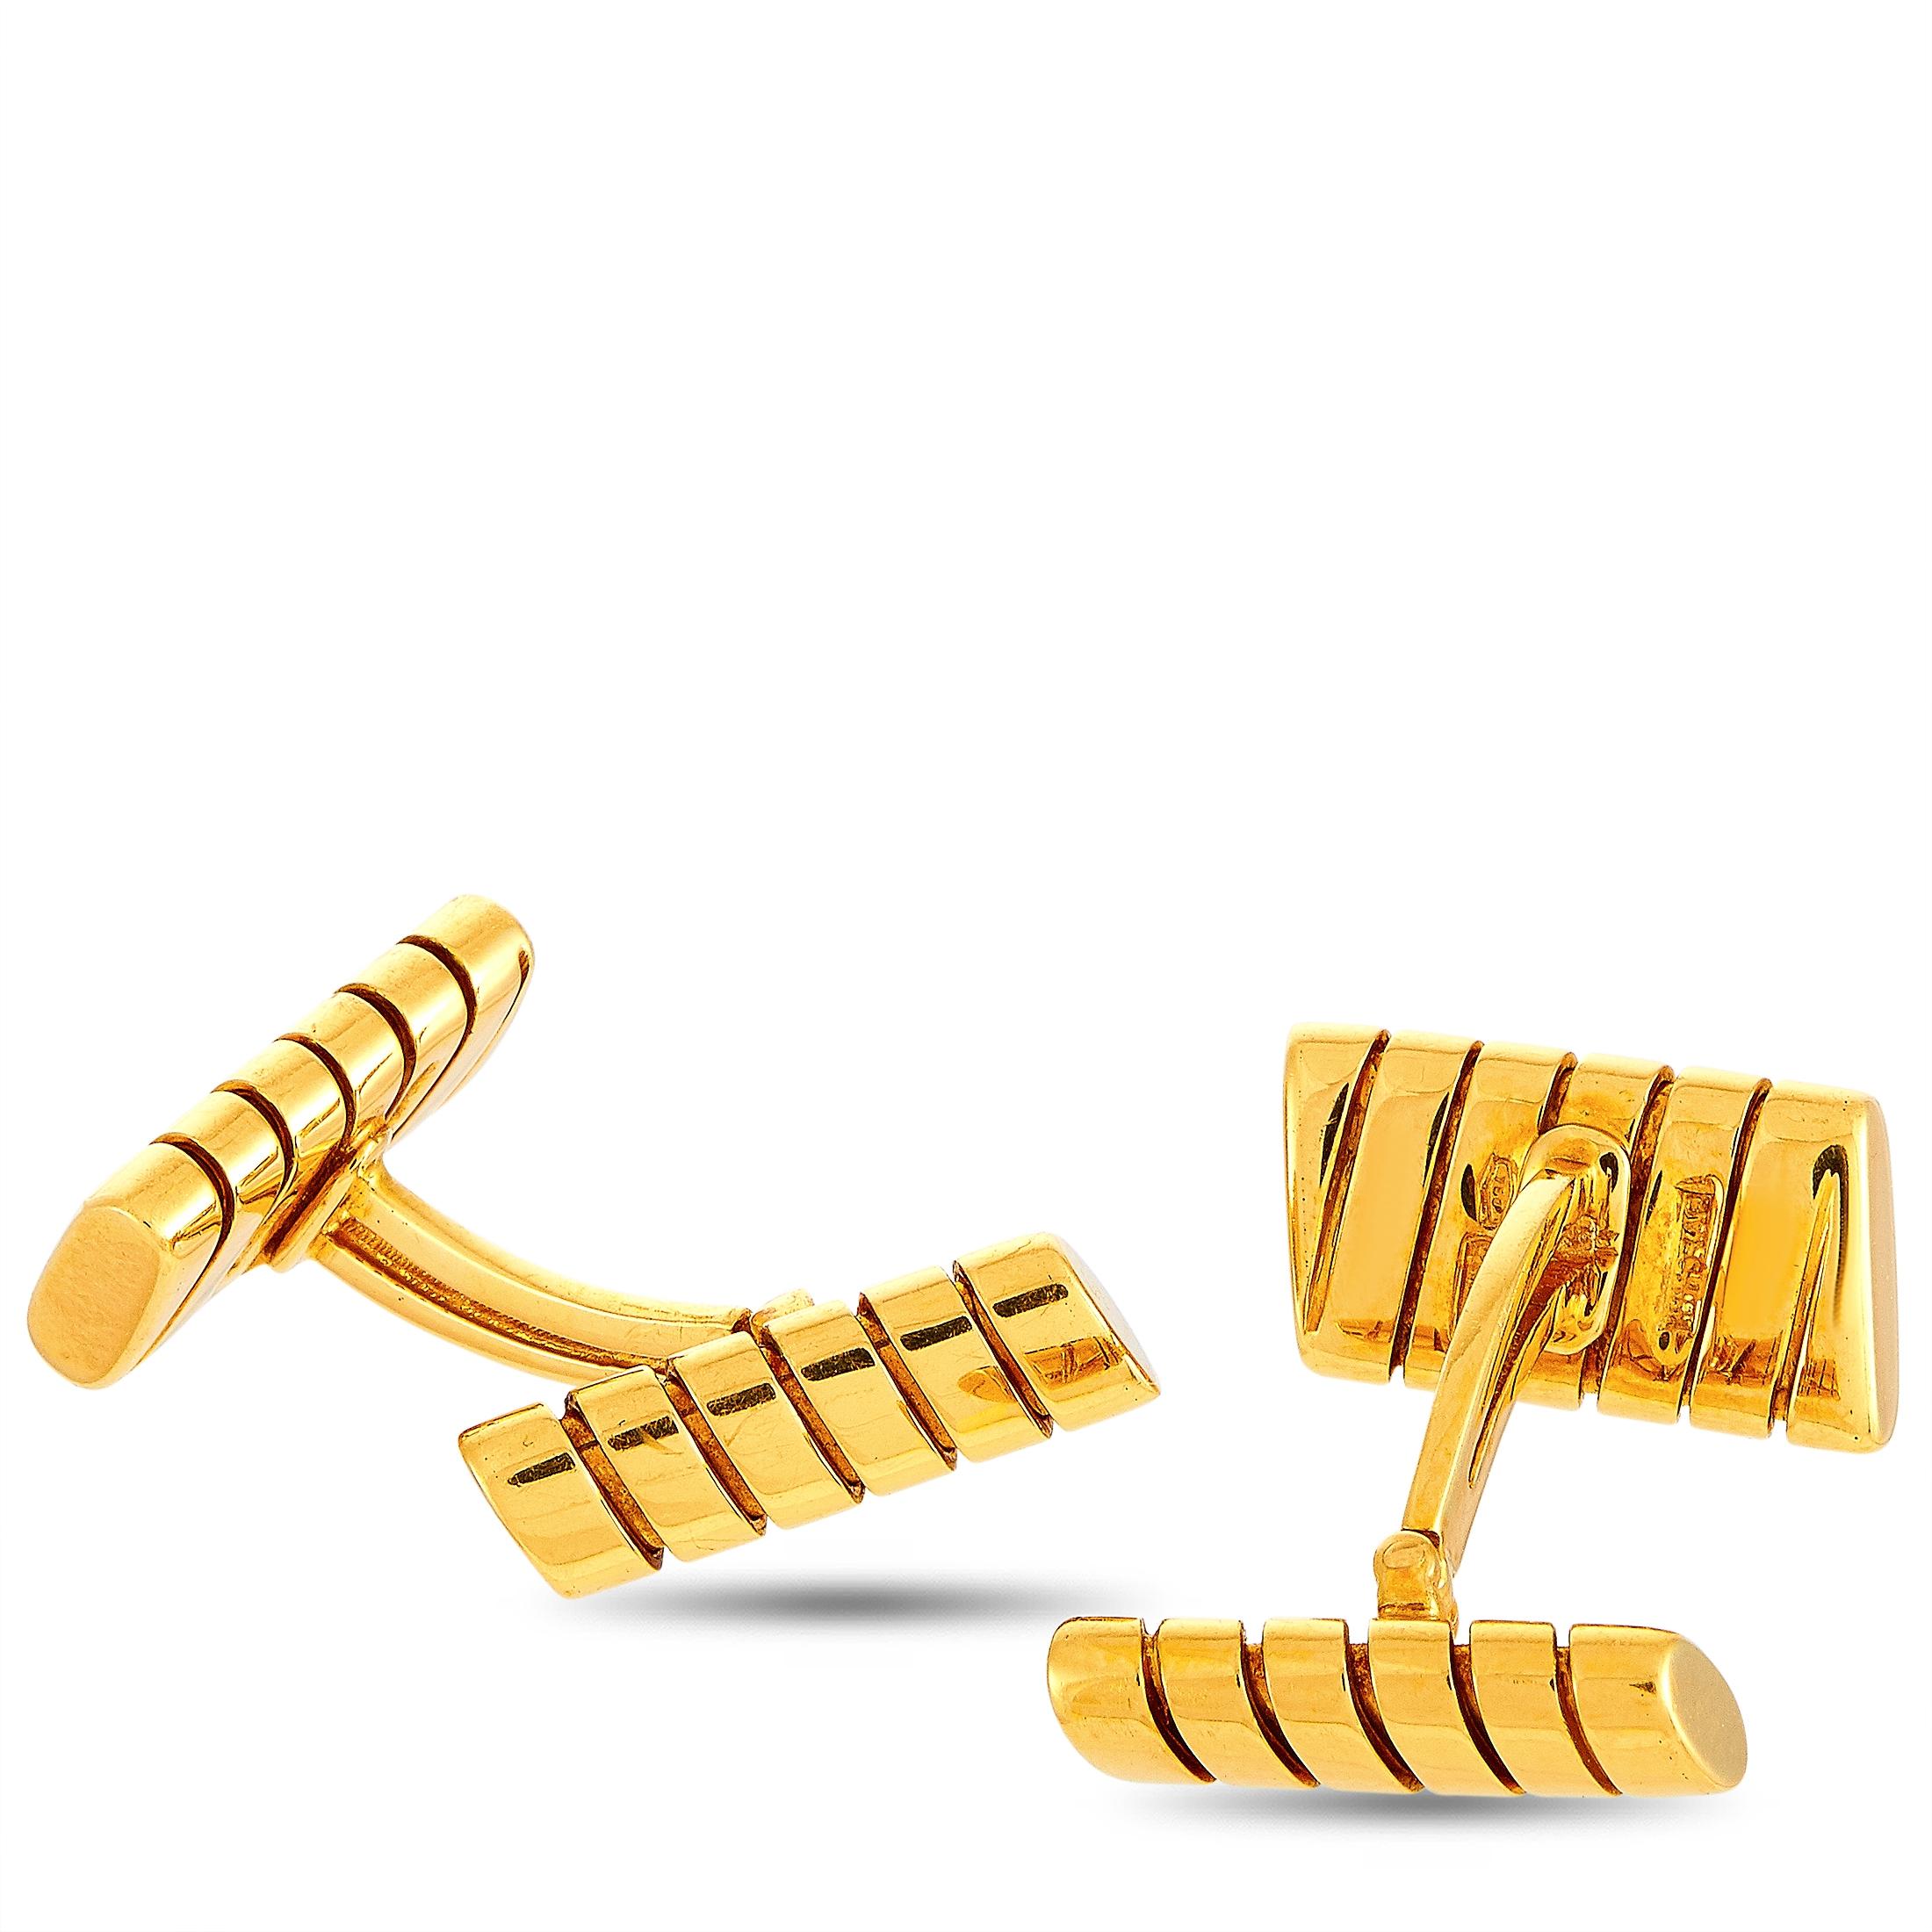 These vintage Bvlgari cufflinks are made of 18K yellow gold and each weighs 6.5 grams. The cufflinks measure 0.65” in length and 0.37” in width.
 
 The pair is offered in estate condition and includes the manufacturer’s box.